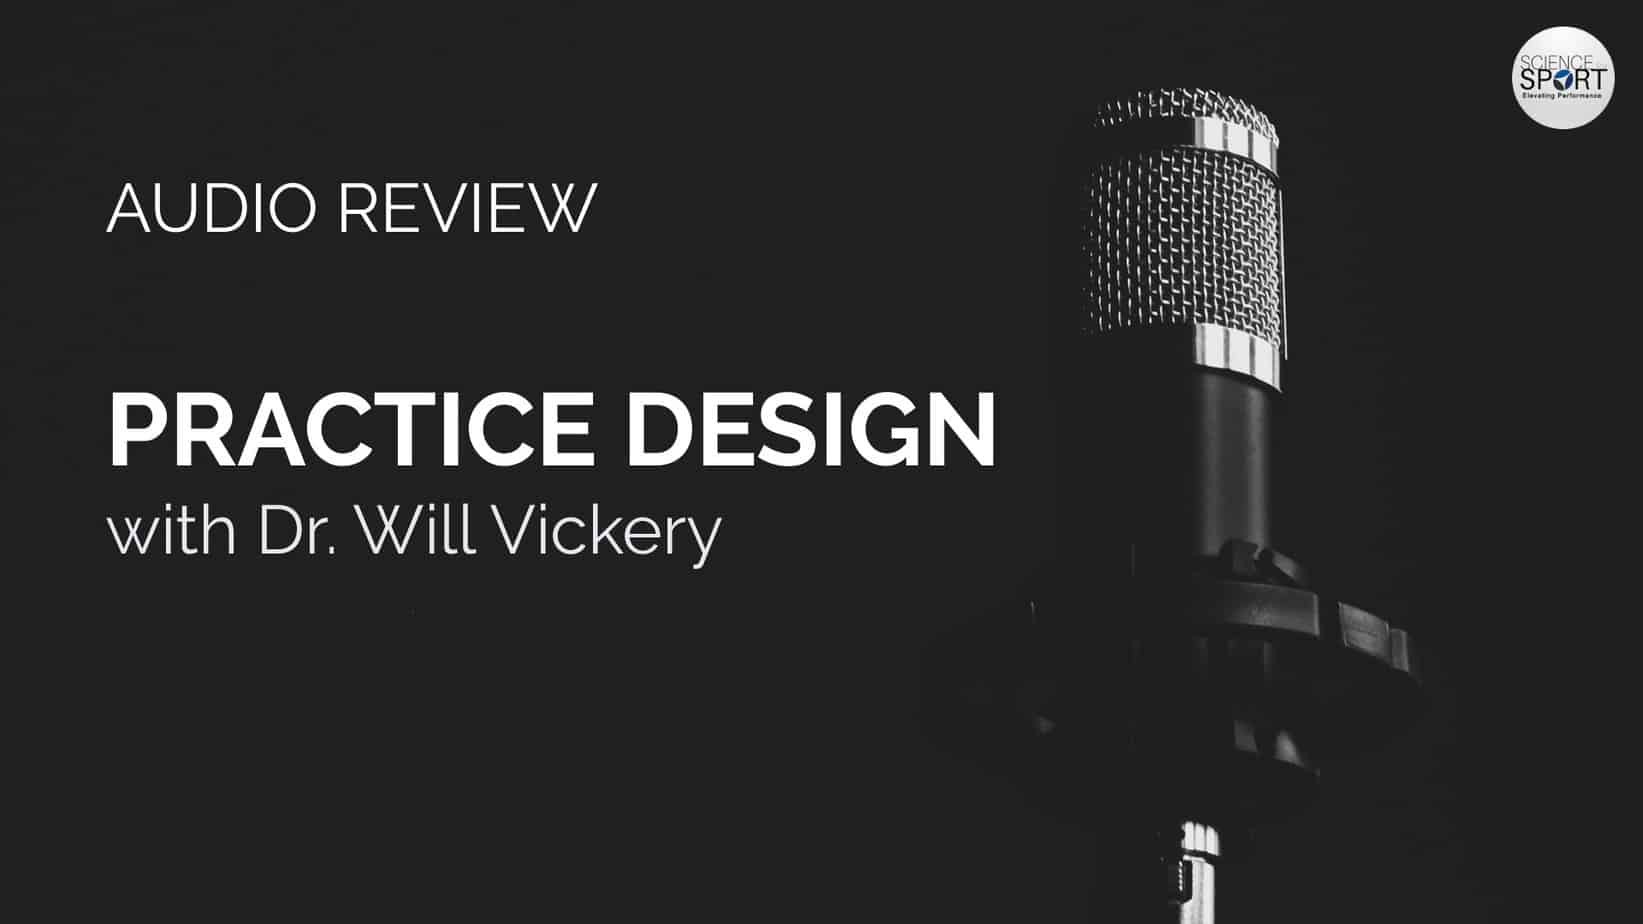 Audio Review - Practice Design with Dr. Will Vickery - Science for Sport